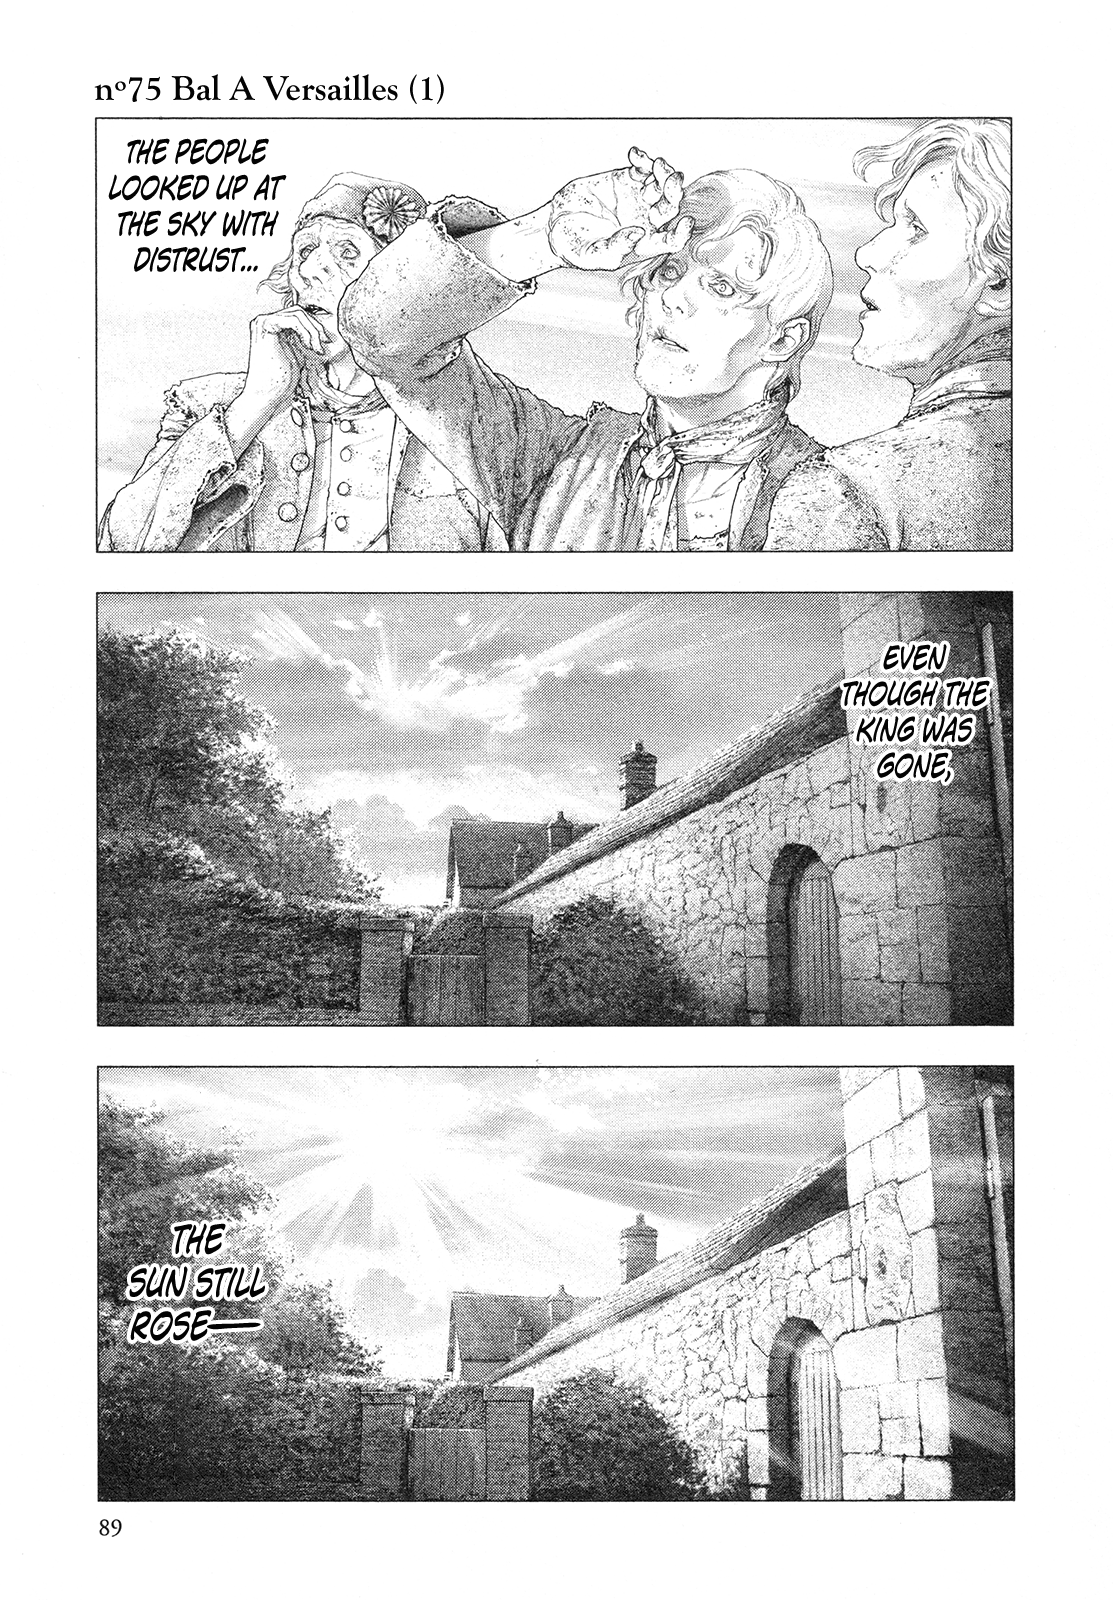 Innocent Rouge Vol.11-Chapter.75-Bal-A-Versailles-(1) Image